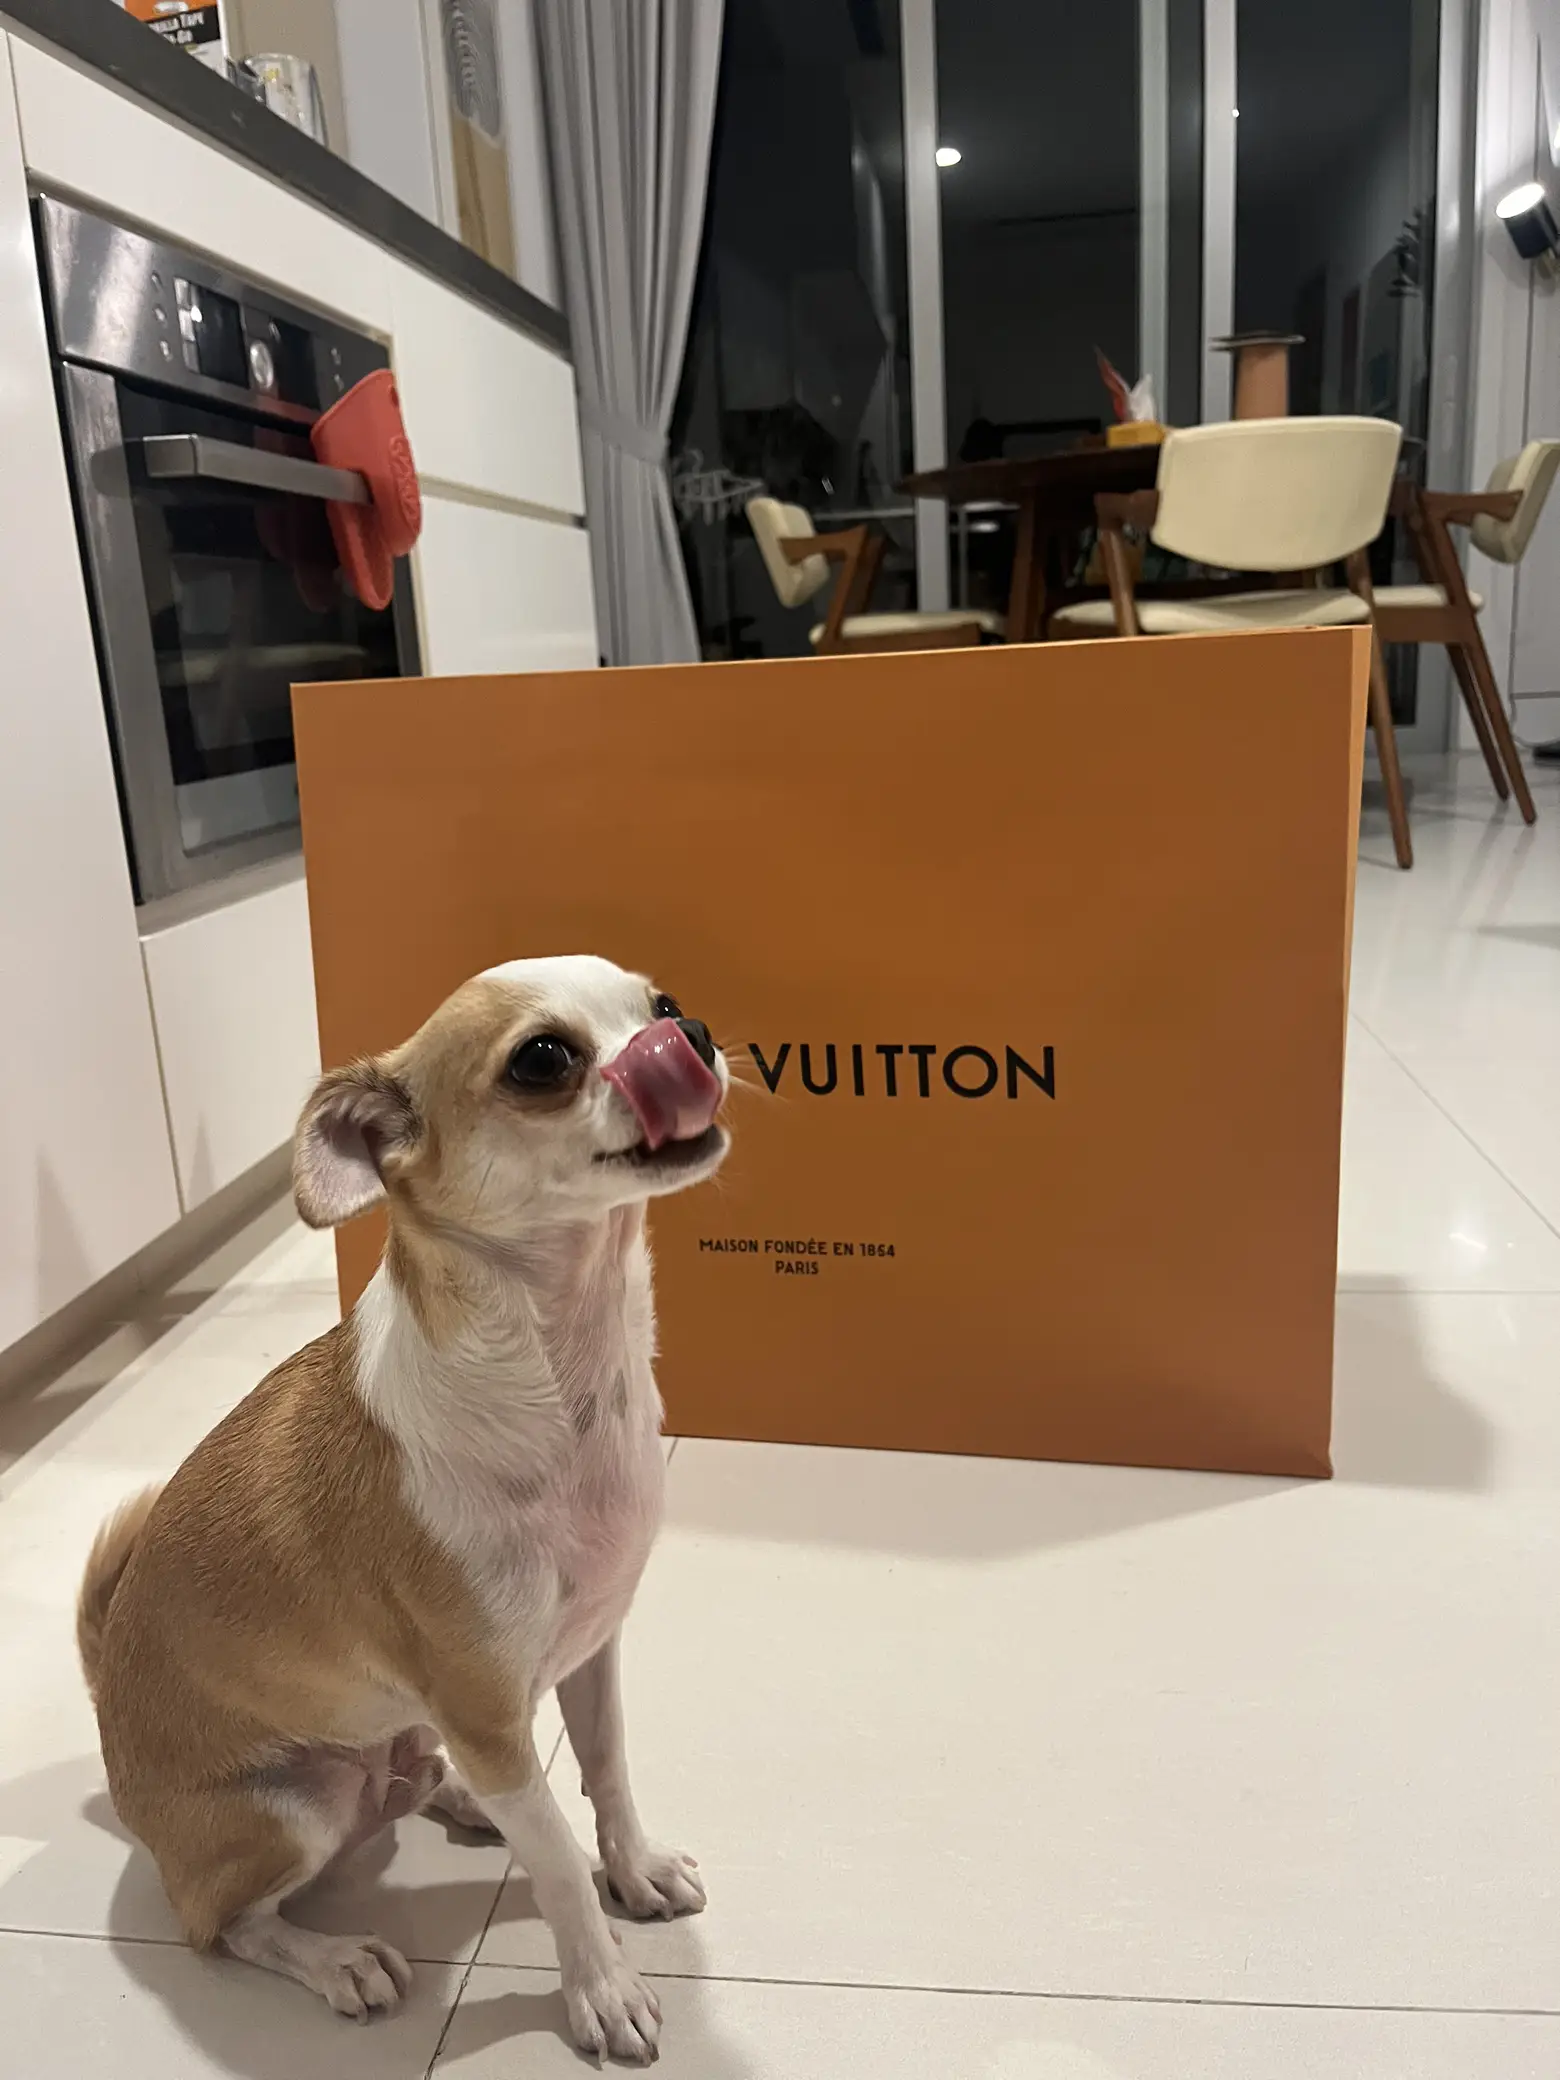 Parris with a Louis Vuitton bag and 4 Chihuahuas.